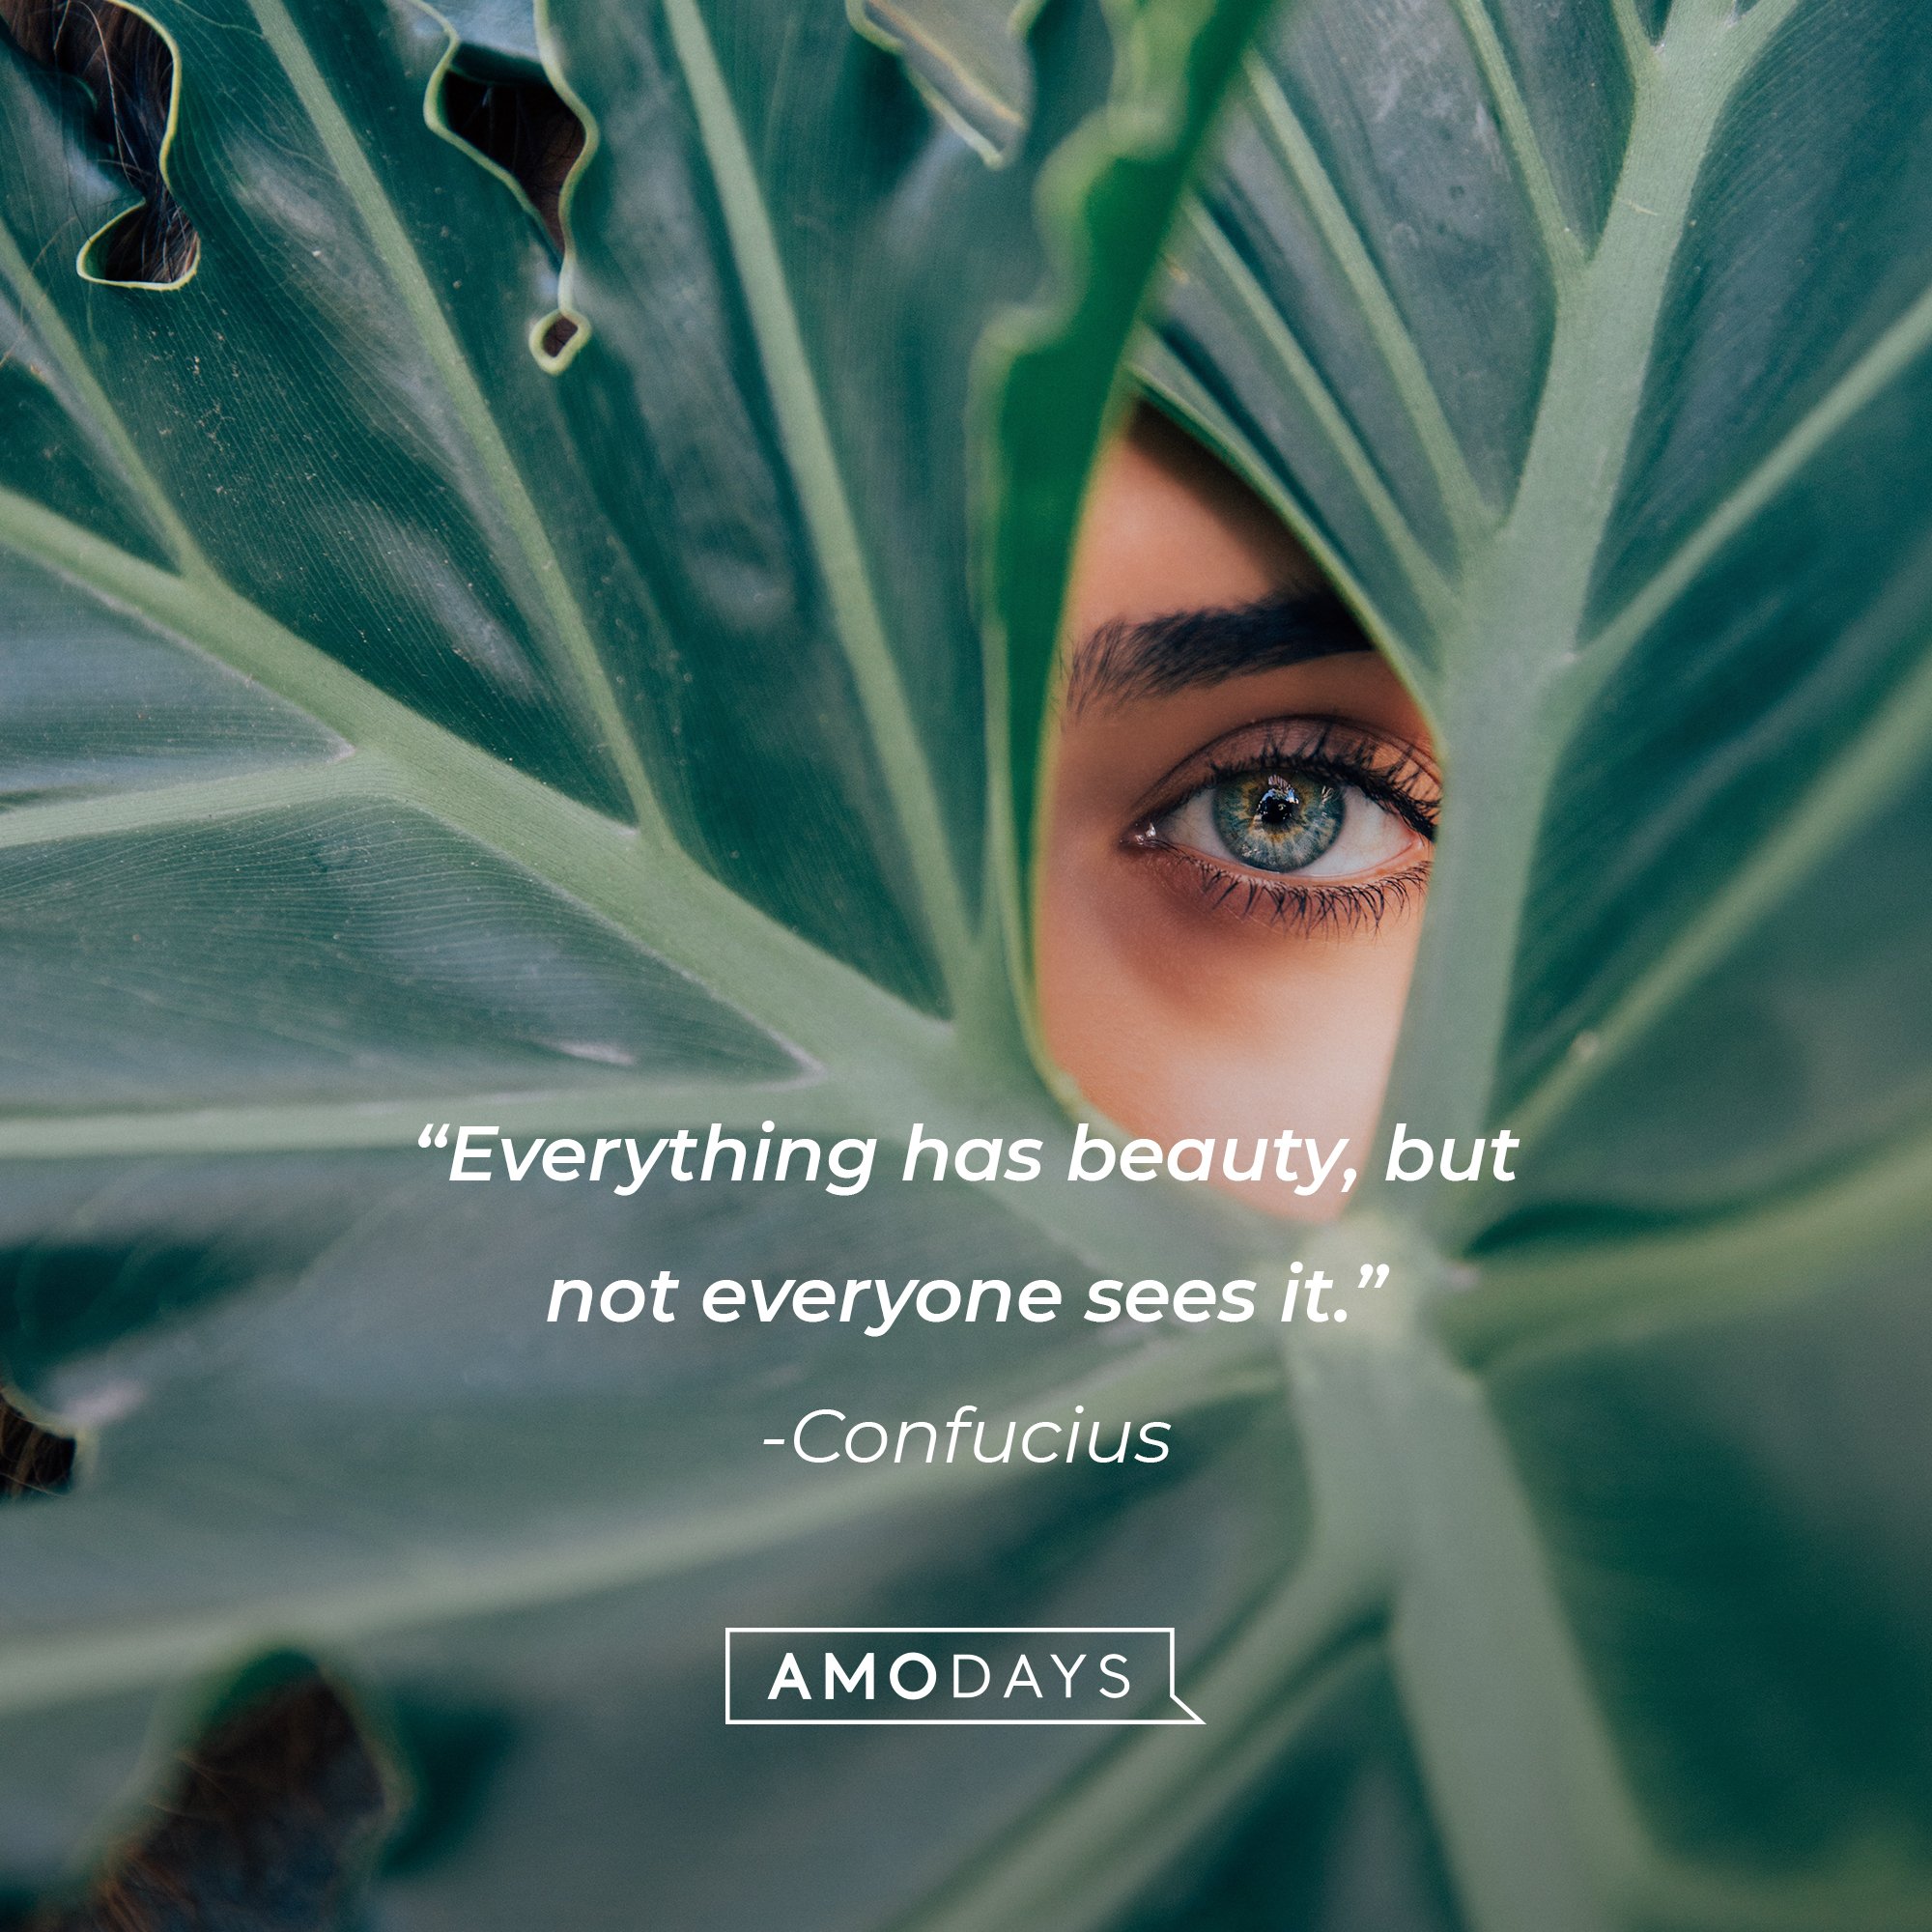 Confucius's quote: "Everything has beauty, but not everyone sees it." | Image: AmoDays